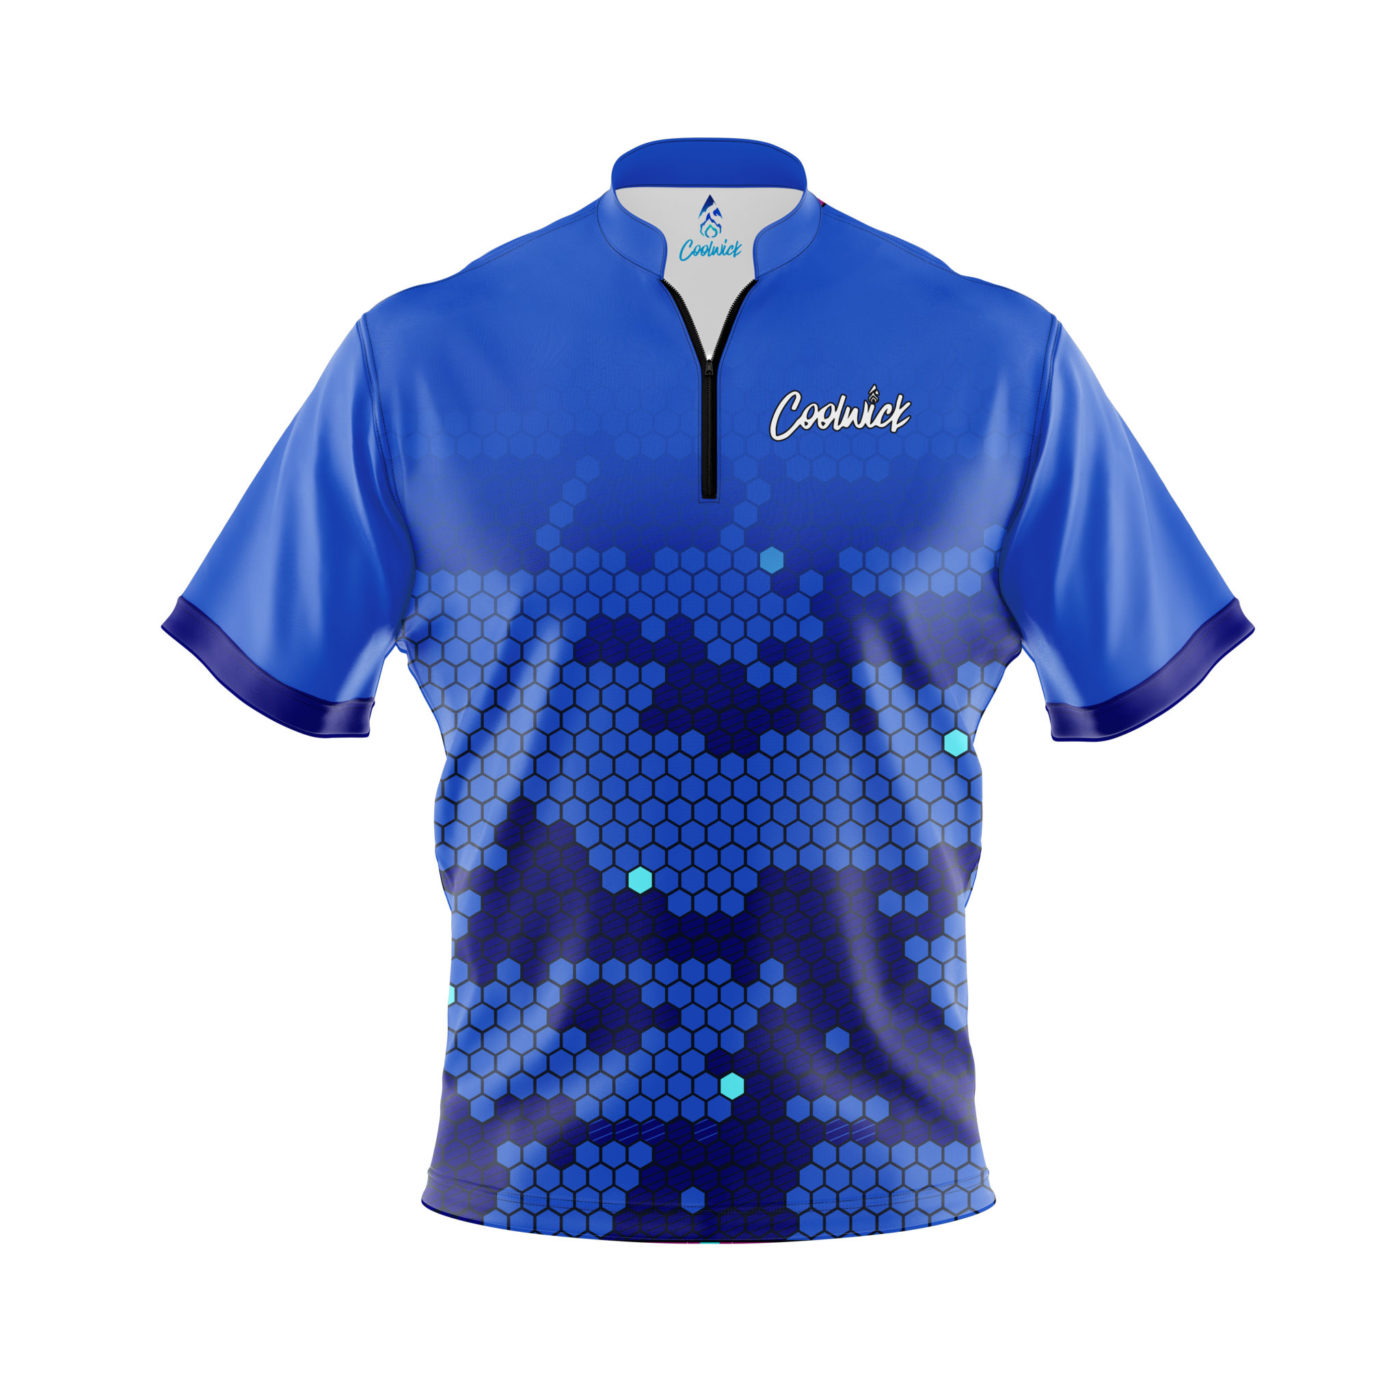 Do you do bowling shirts for team and is there a discount or minimum number